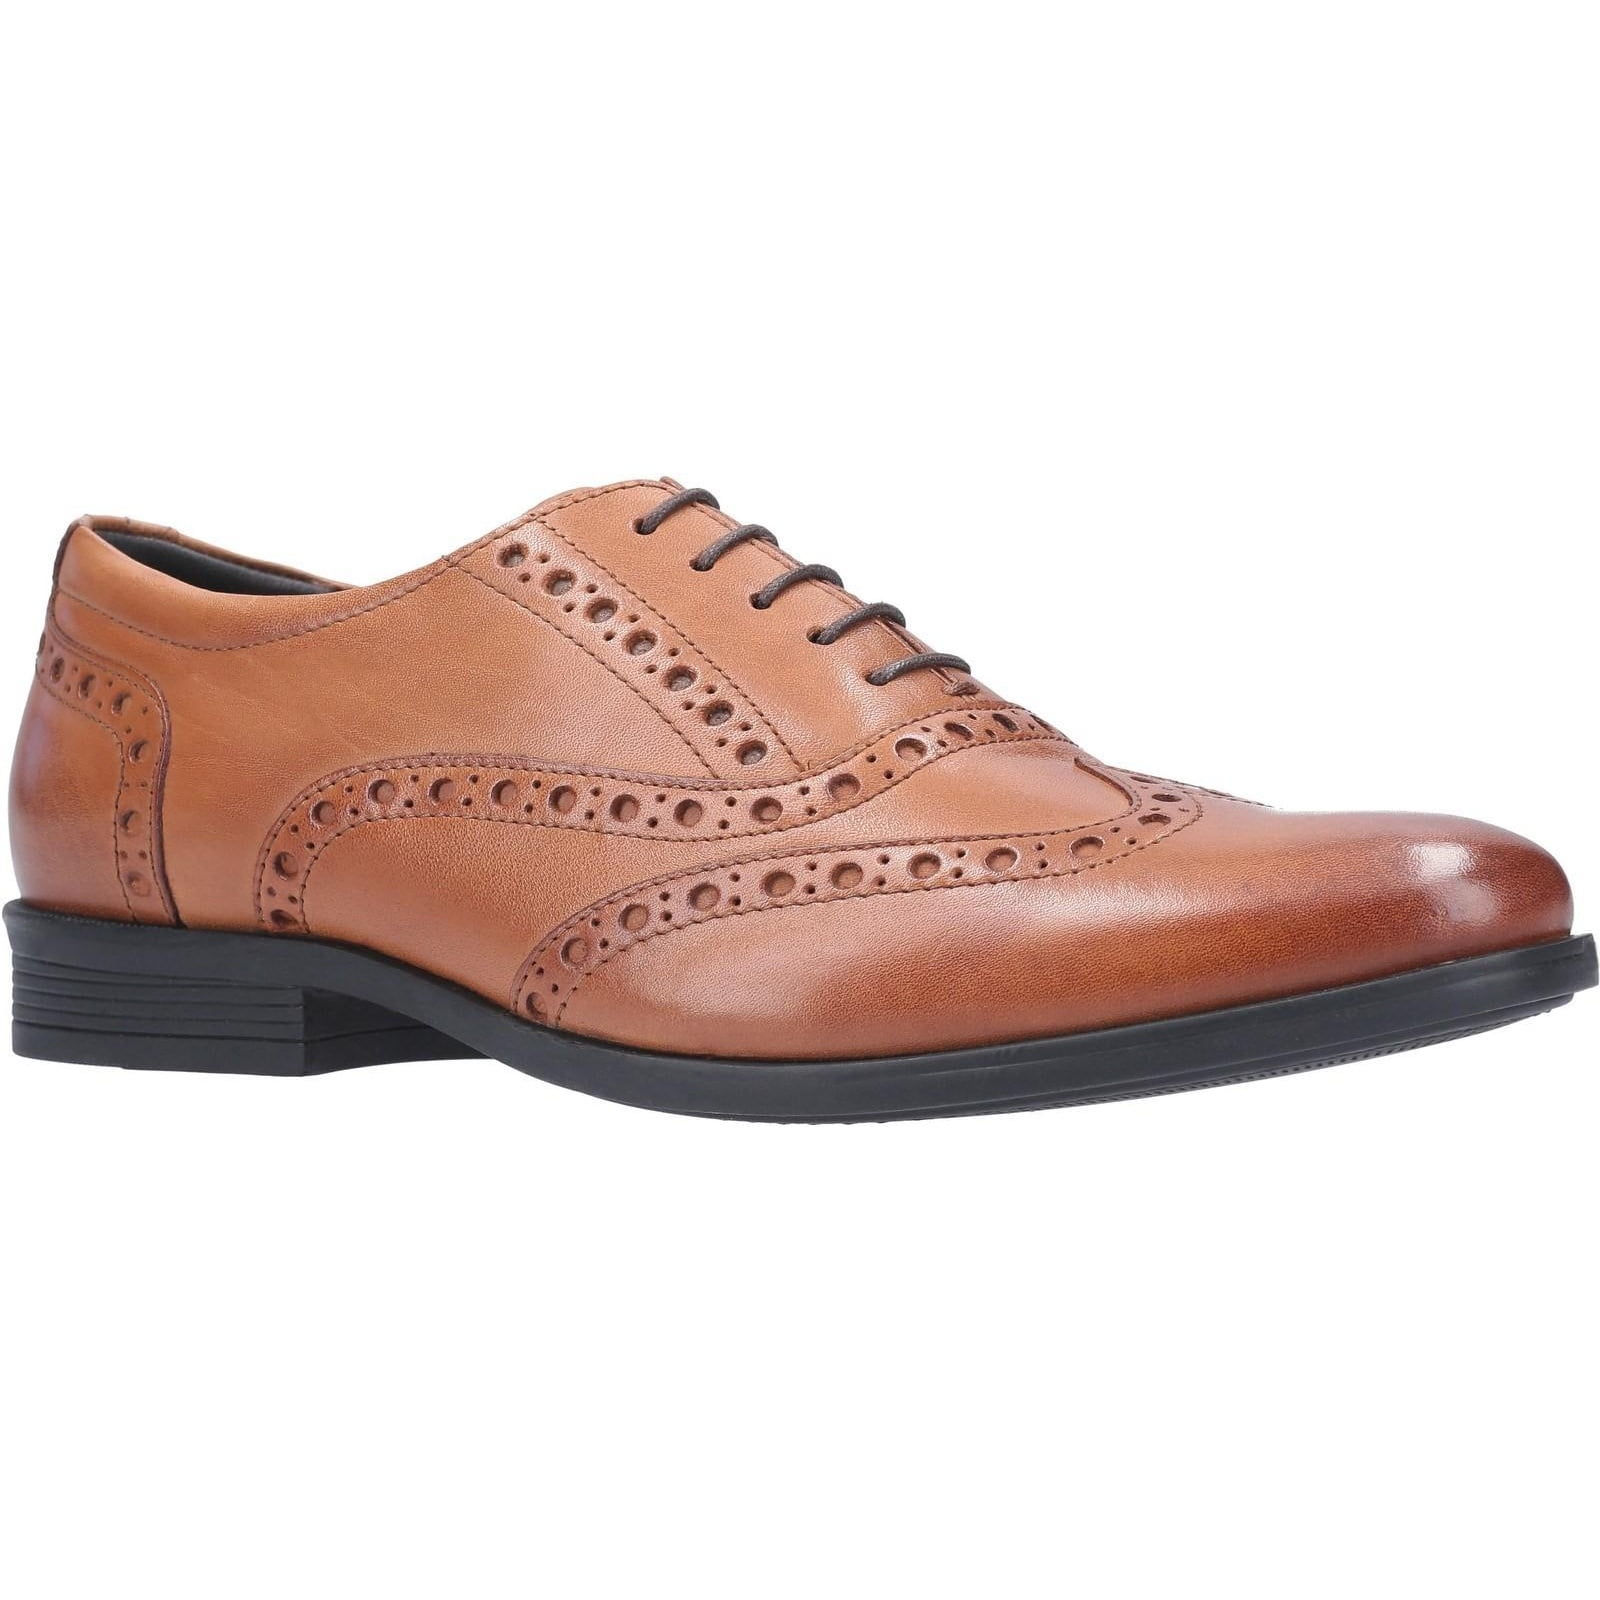 Hush Puppies Formal Shoes For Men